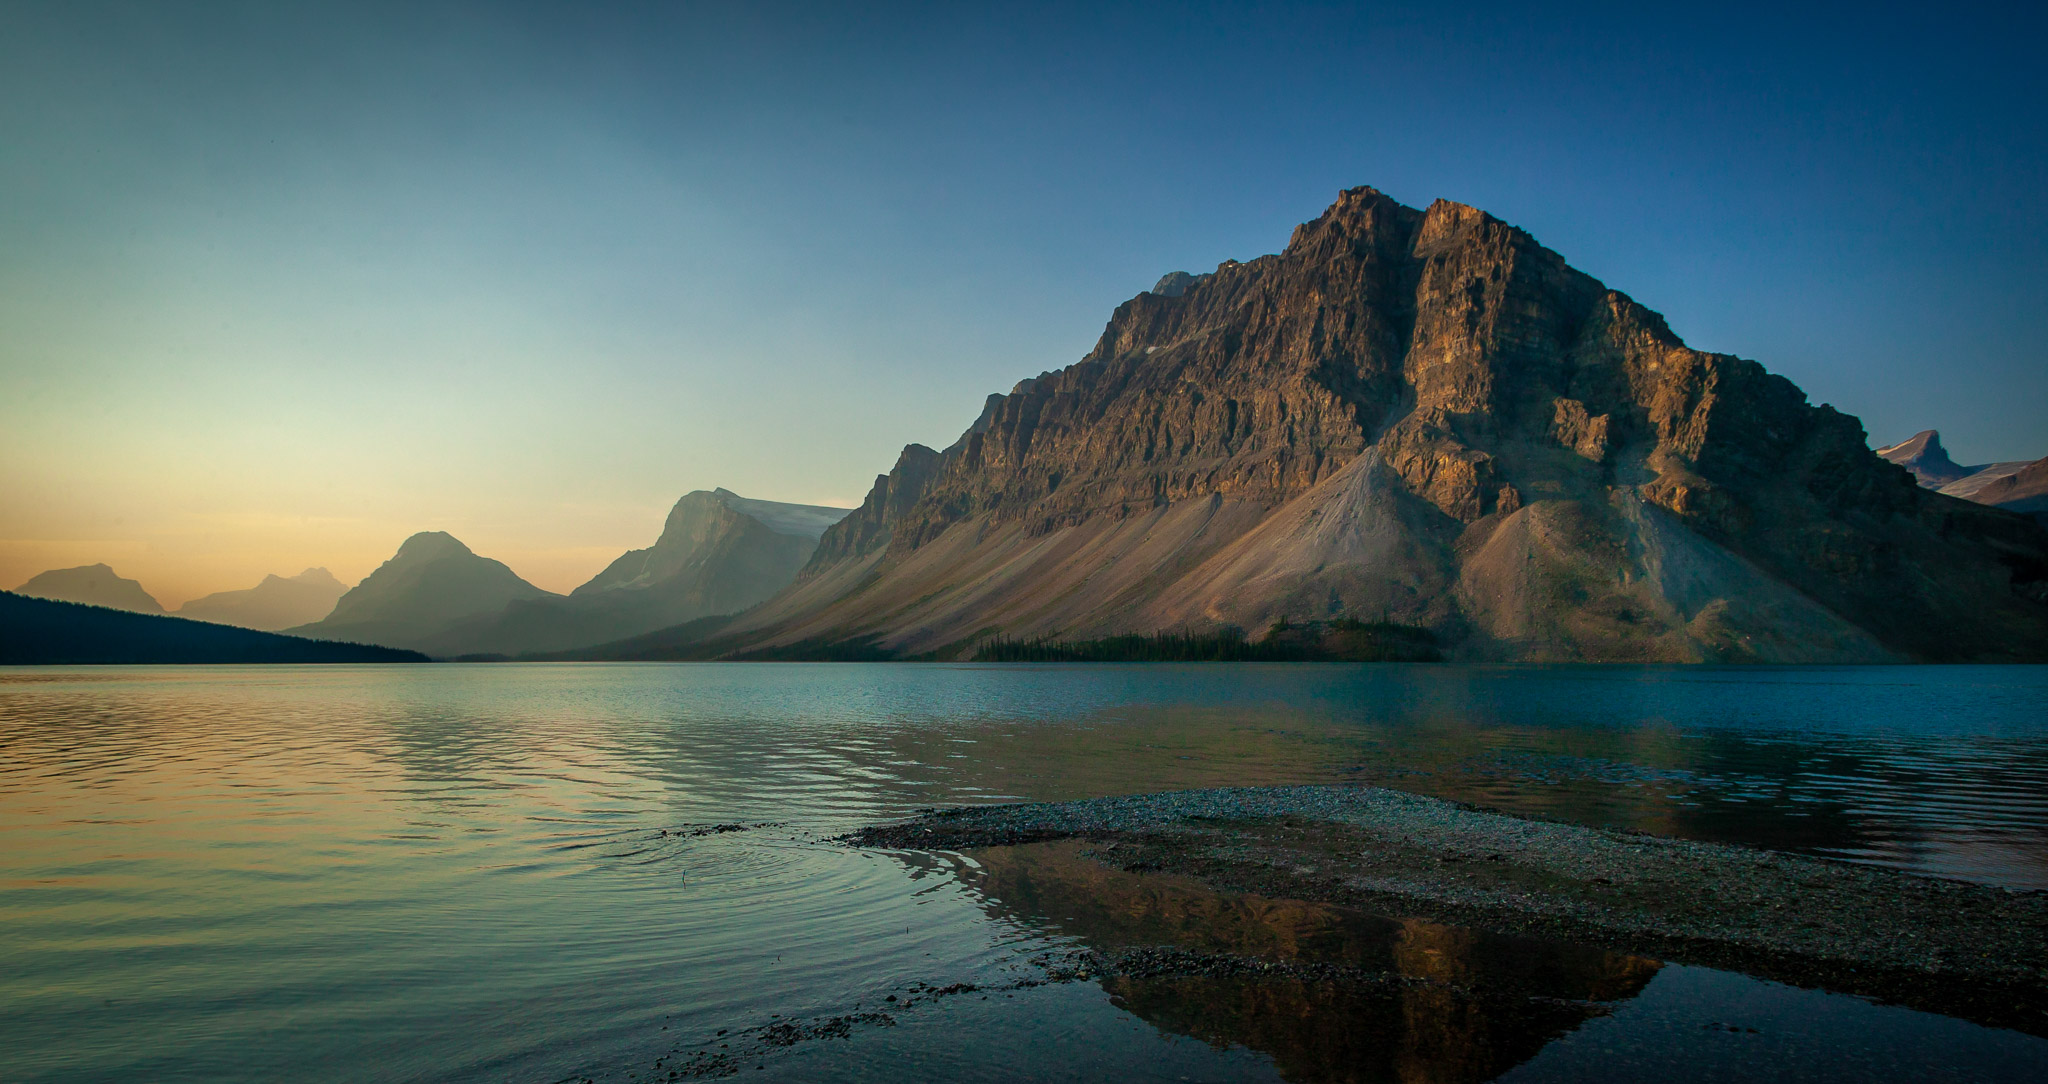 Early light on Crowfoot Mountain over Bow Lake